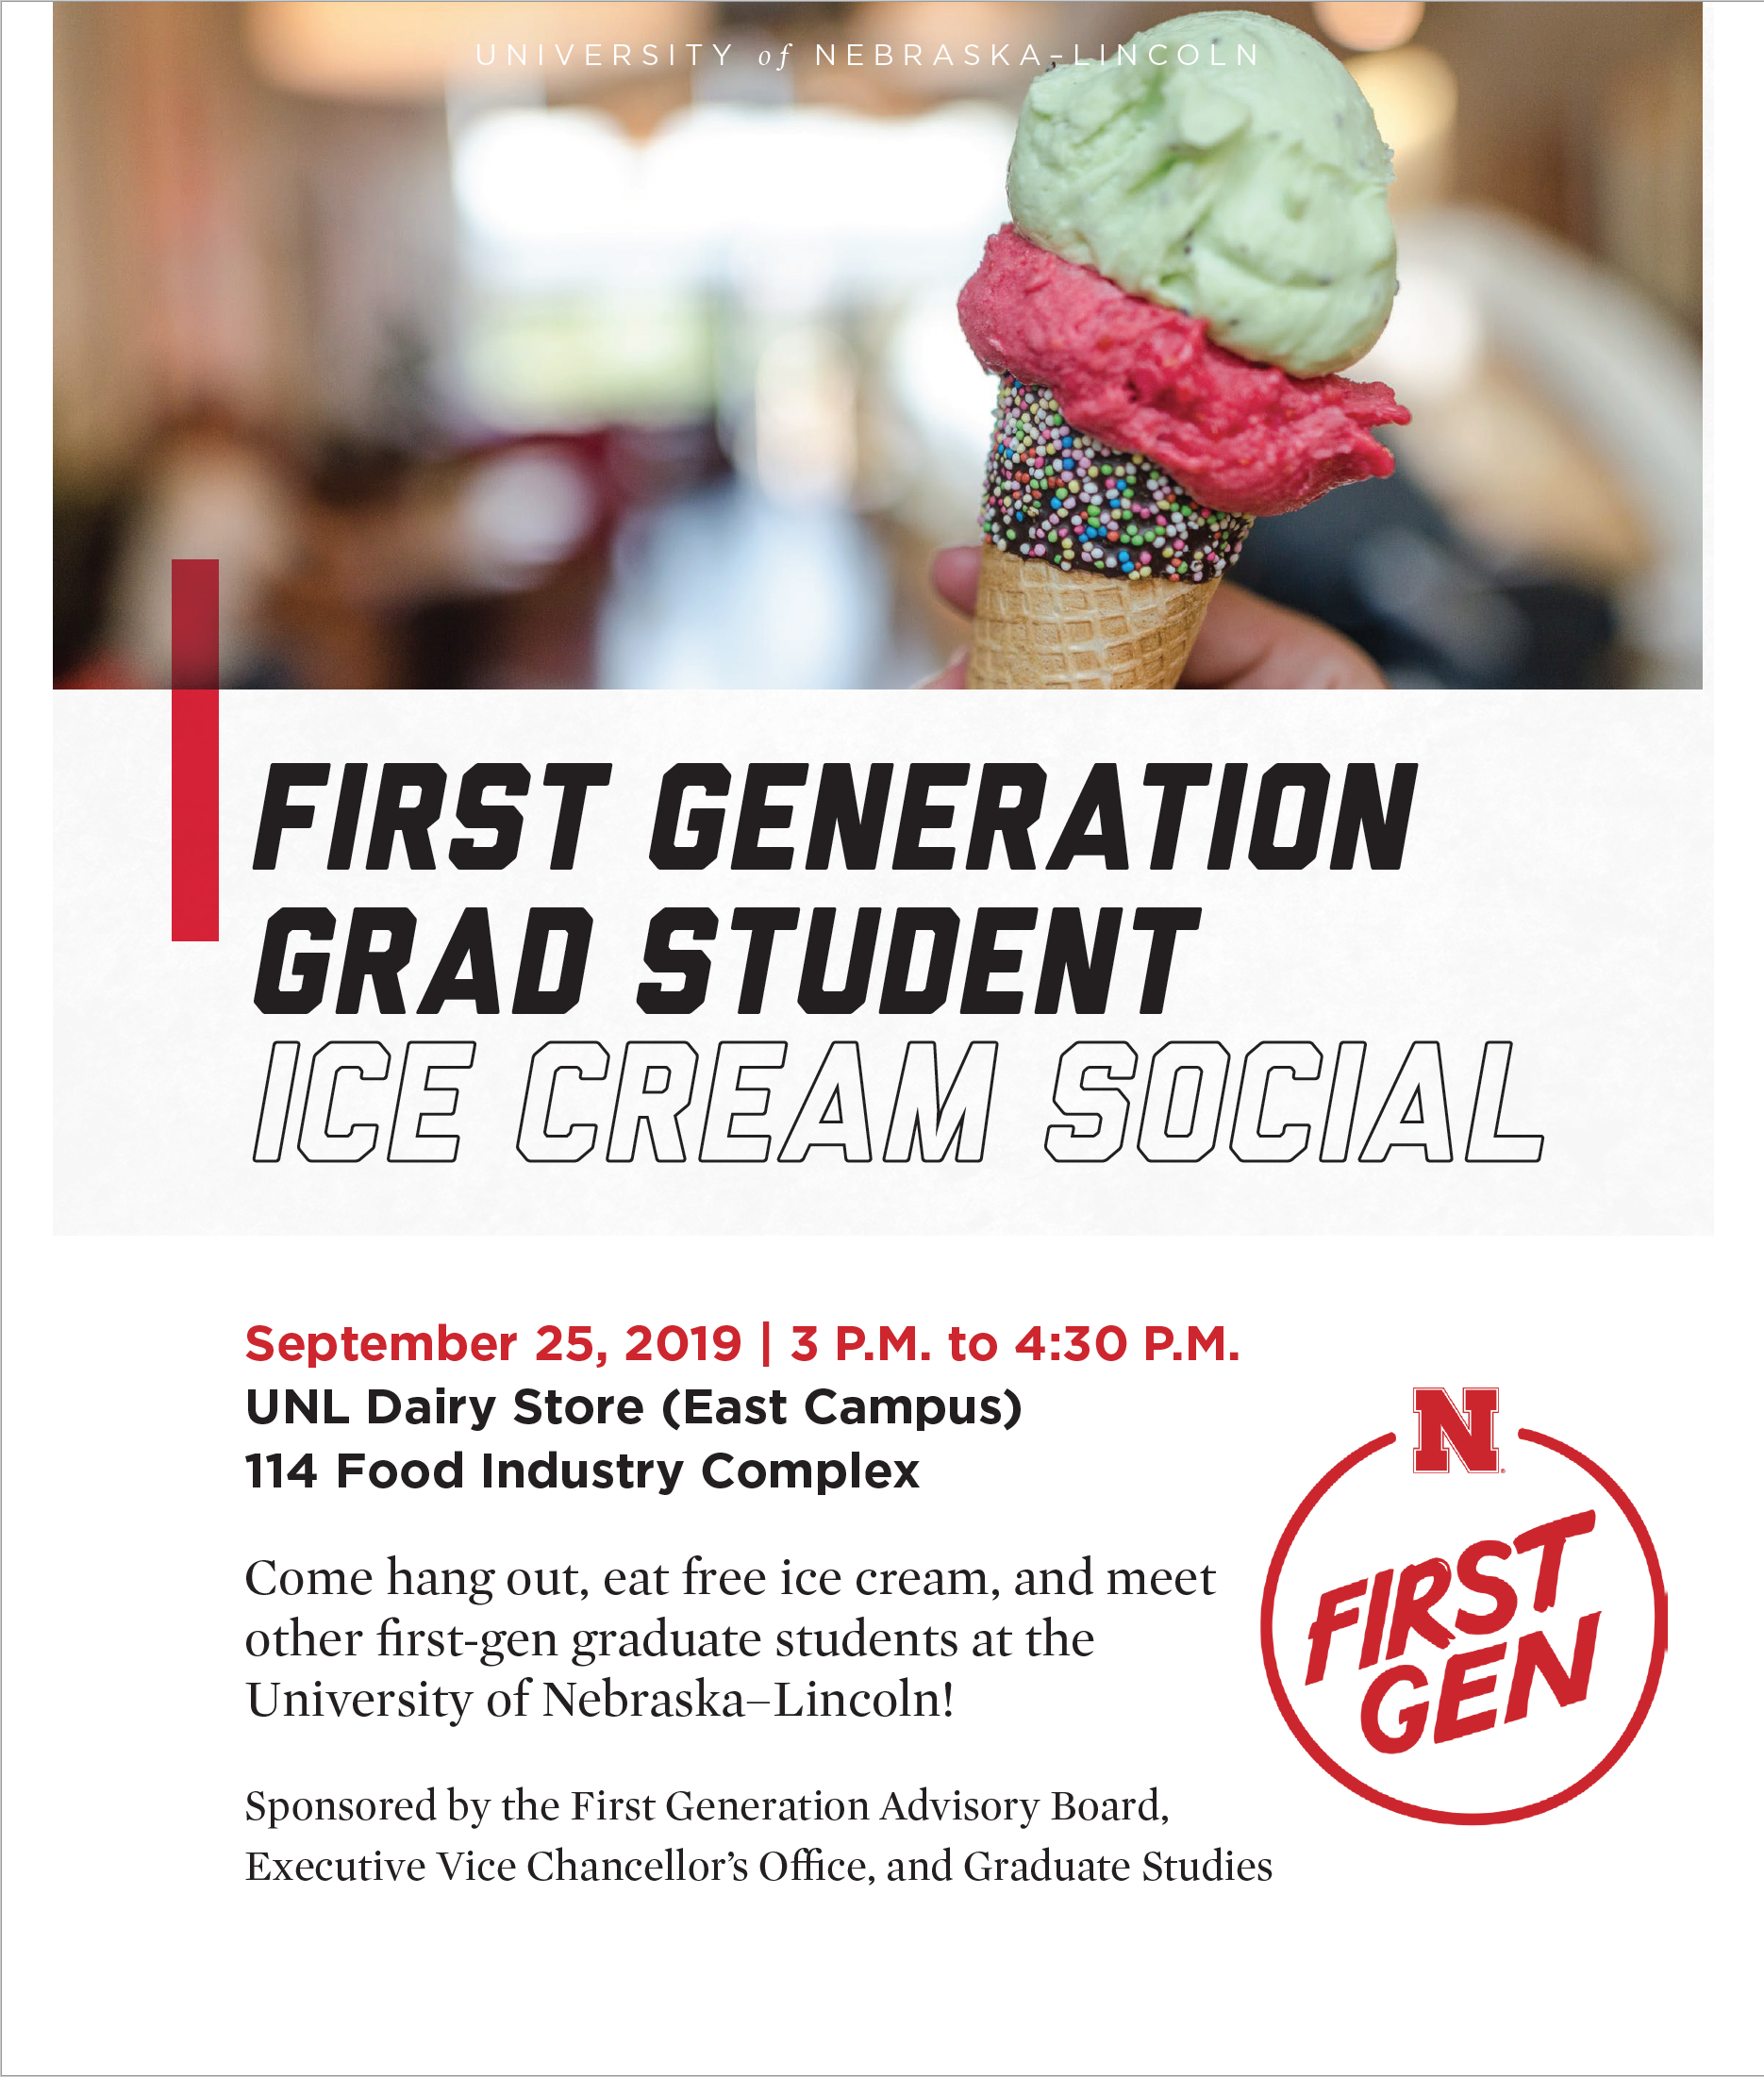 First-generation graduate students can enjoy ice cream, meet other first-gens, and take a break from the semester at the Dairy Store on East Campus. 